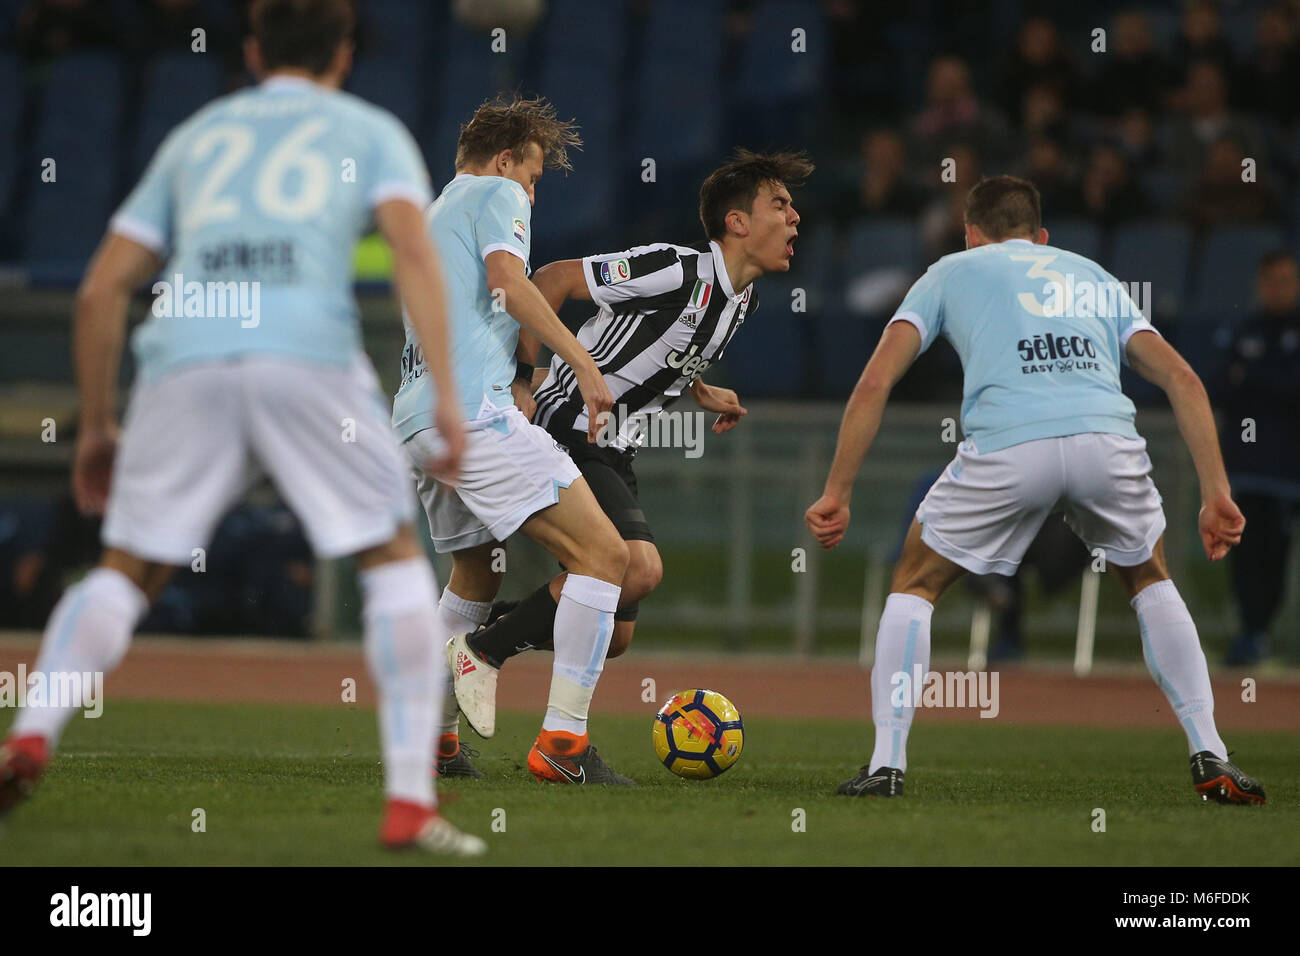 Rome, Italy. 3rd March 2018.  Serie A. SS Lazio vs Fc Juventus.PAULO DYBALA (JUV) in action during the match S.S. Lazio vs F.C. Juventus at Stadio Olimpico in Rome. Credit: marco iacobucci/Alamy Live News Credit: marco iacobucci/Alamy Live News Stock Photo